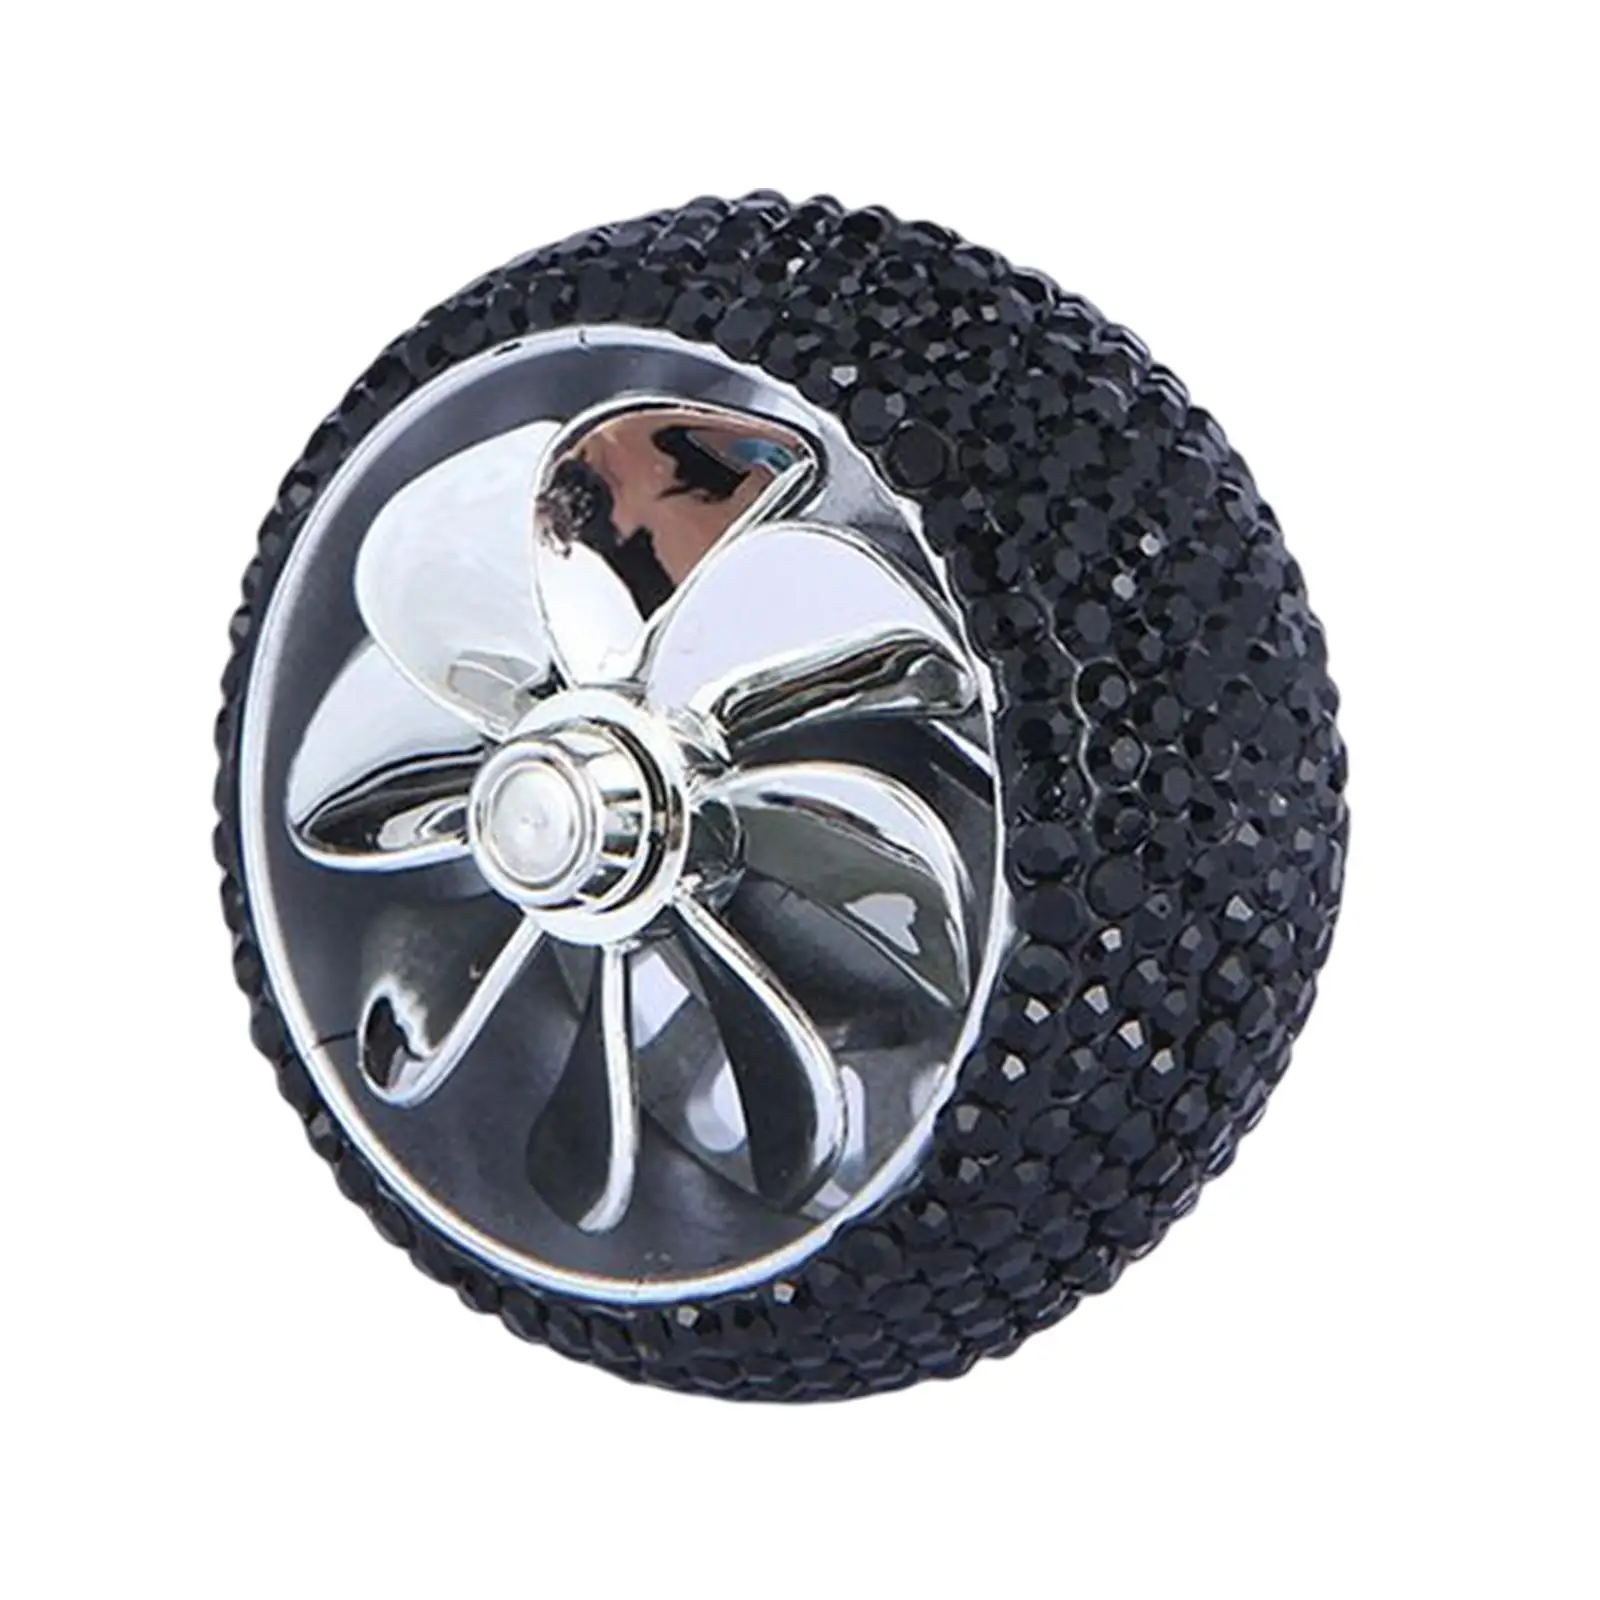 Air Vent Fan Diffuser Decoration Supplies Accessories Auto Ornament Fashion Gift Exquisite Car Air Outlet Clip Aromatherapy